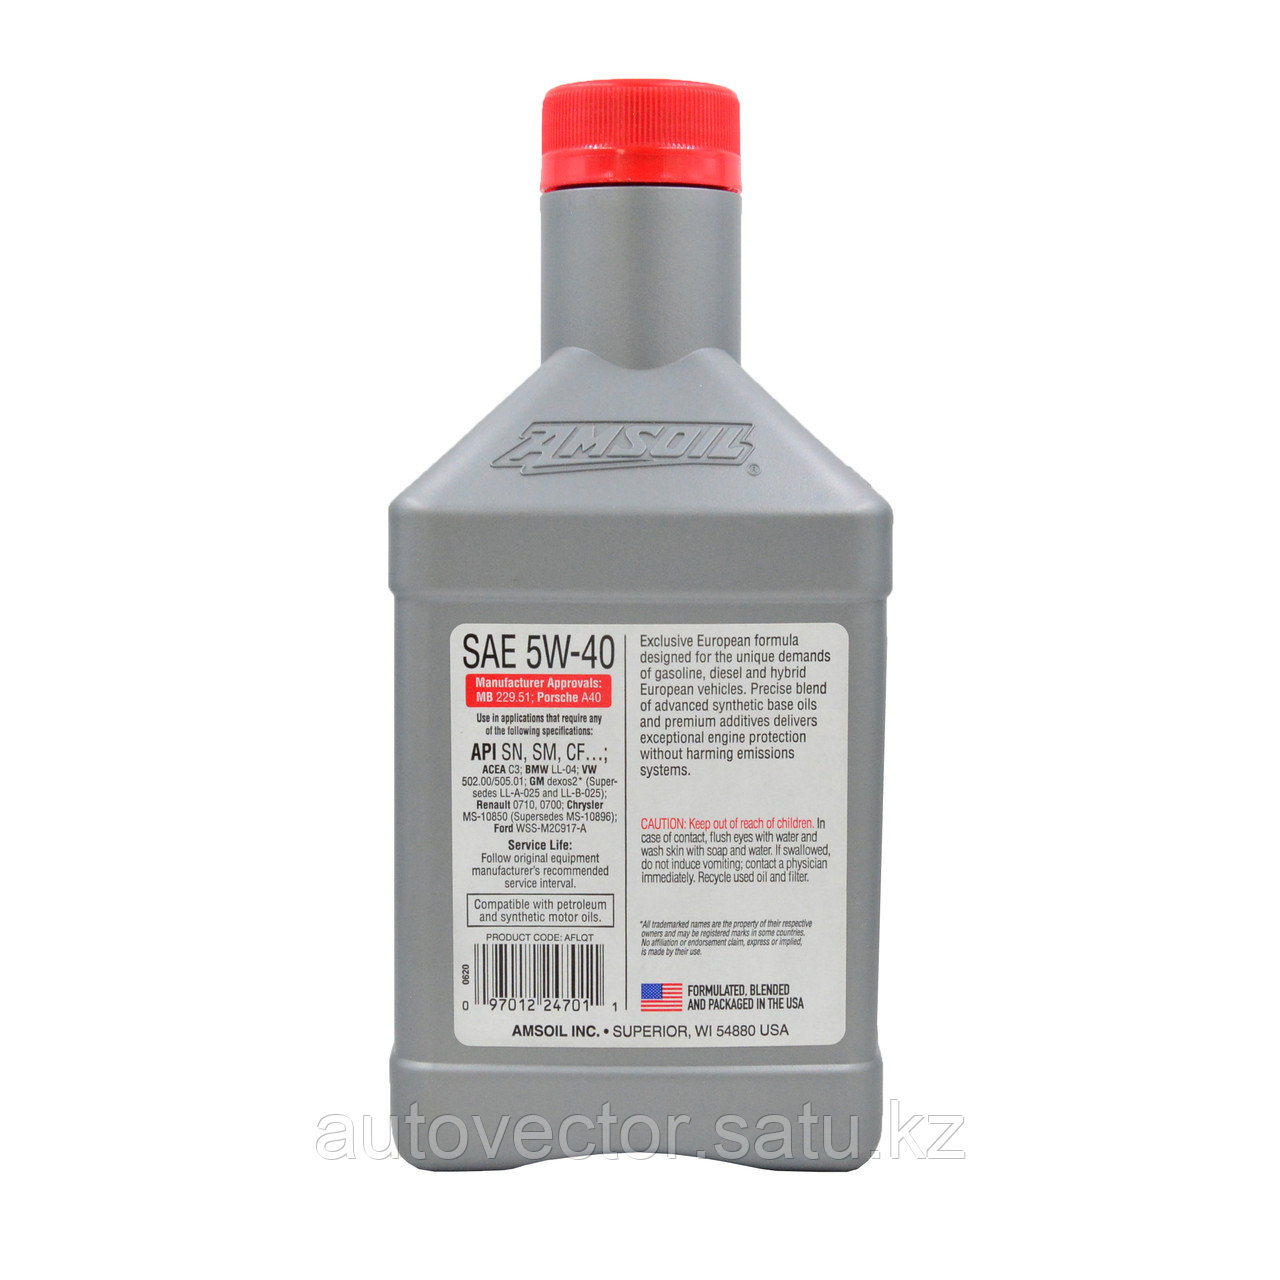 Моторное масло AMSOIL MS SAE 5W-40 100% Synthetic European Motor Oil 0.946L - фото 2 - id-p114207633